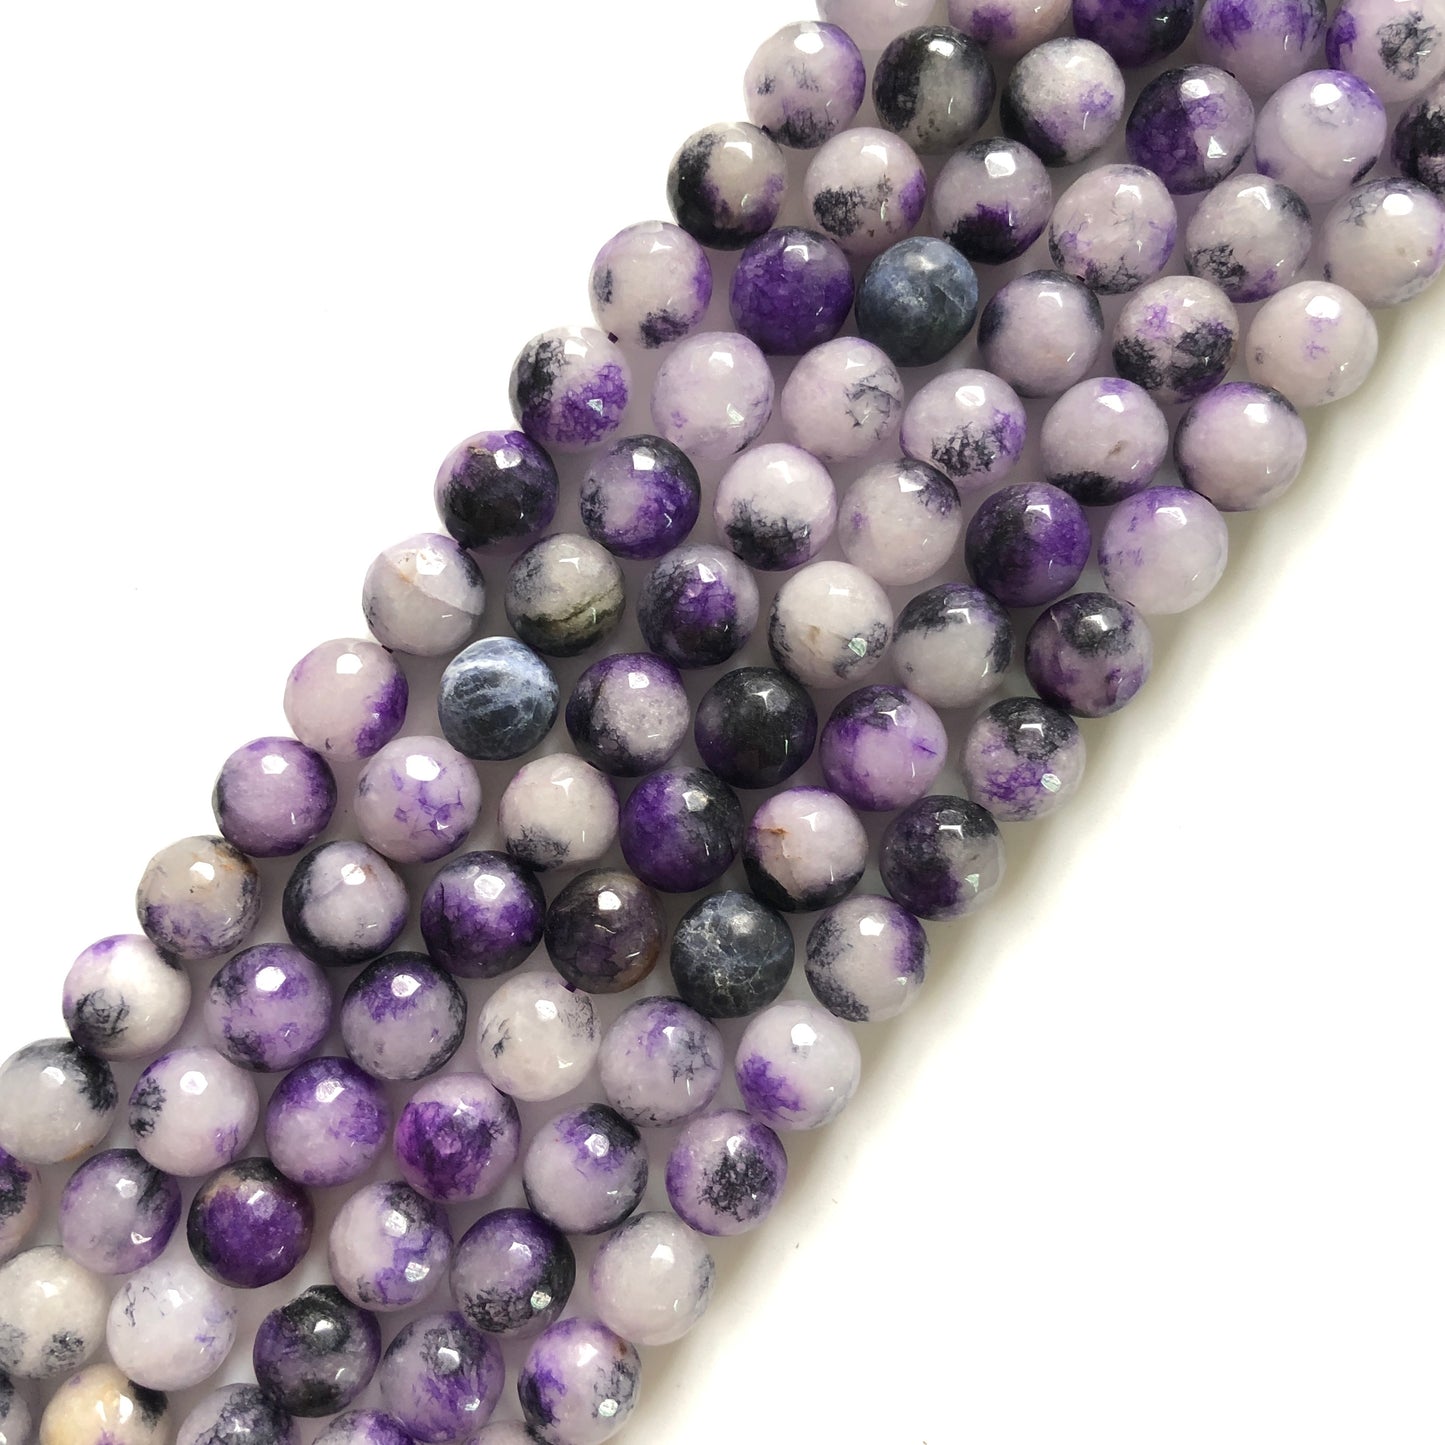 2 Strands/lot 10/12mm Purple White Agate Faceted Stone Beads Stone Beads 12mm Stone Beads Faceted Agate Beads Charms Beads Beyond